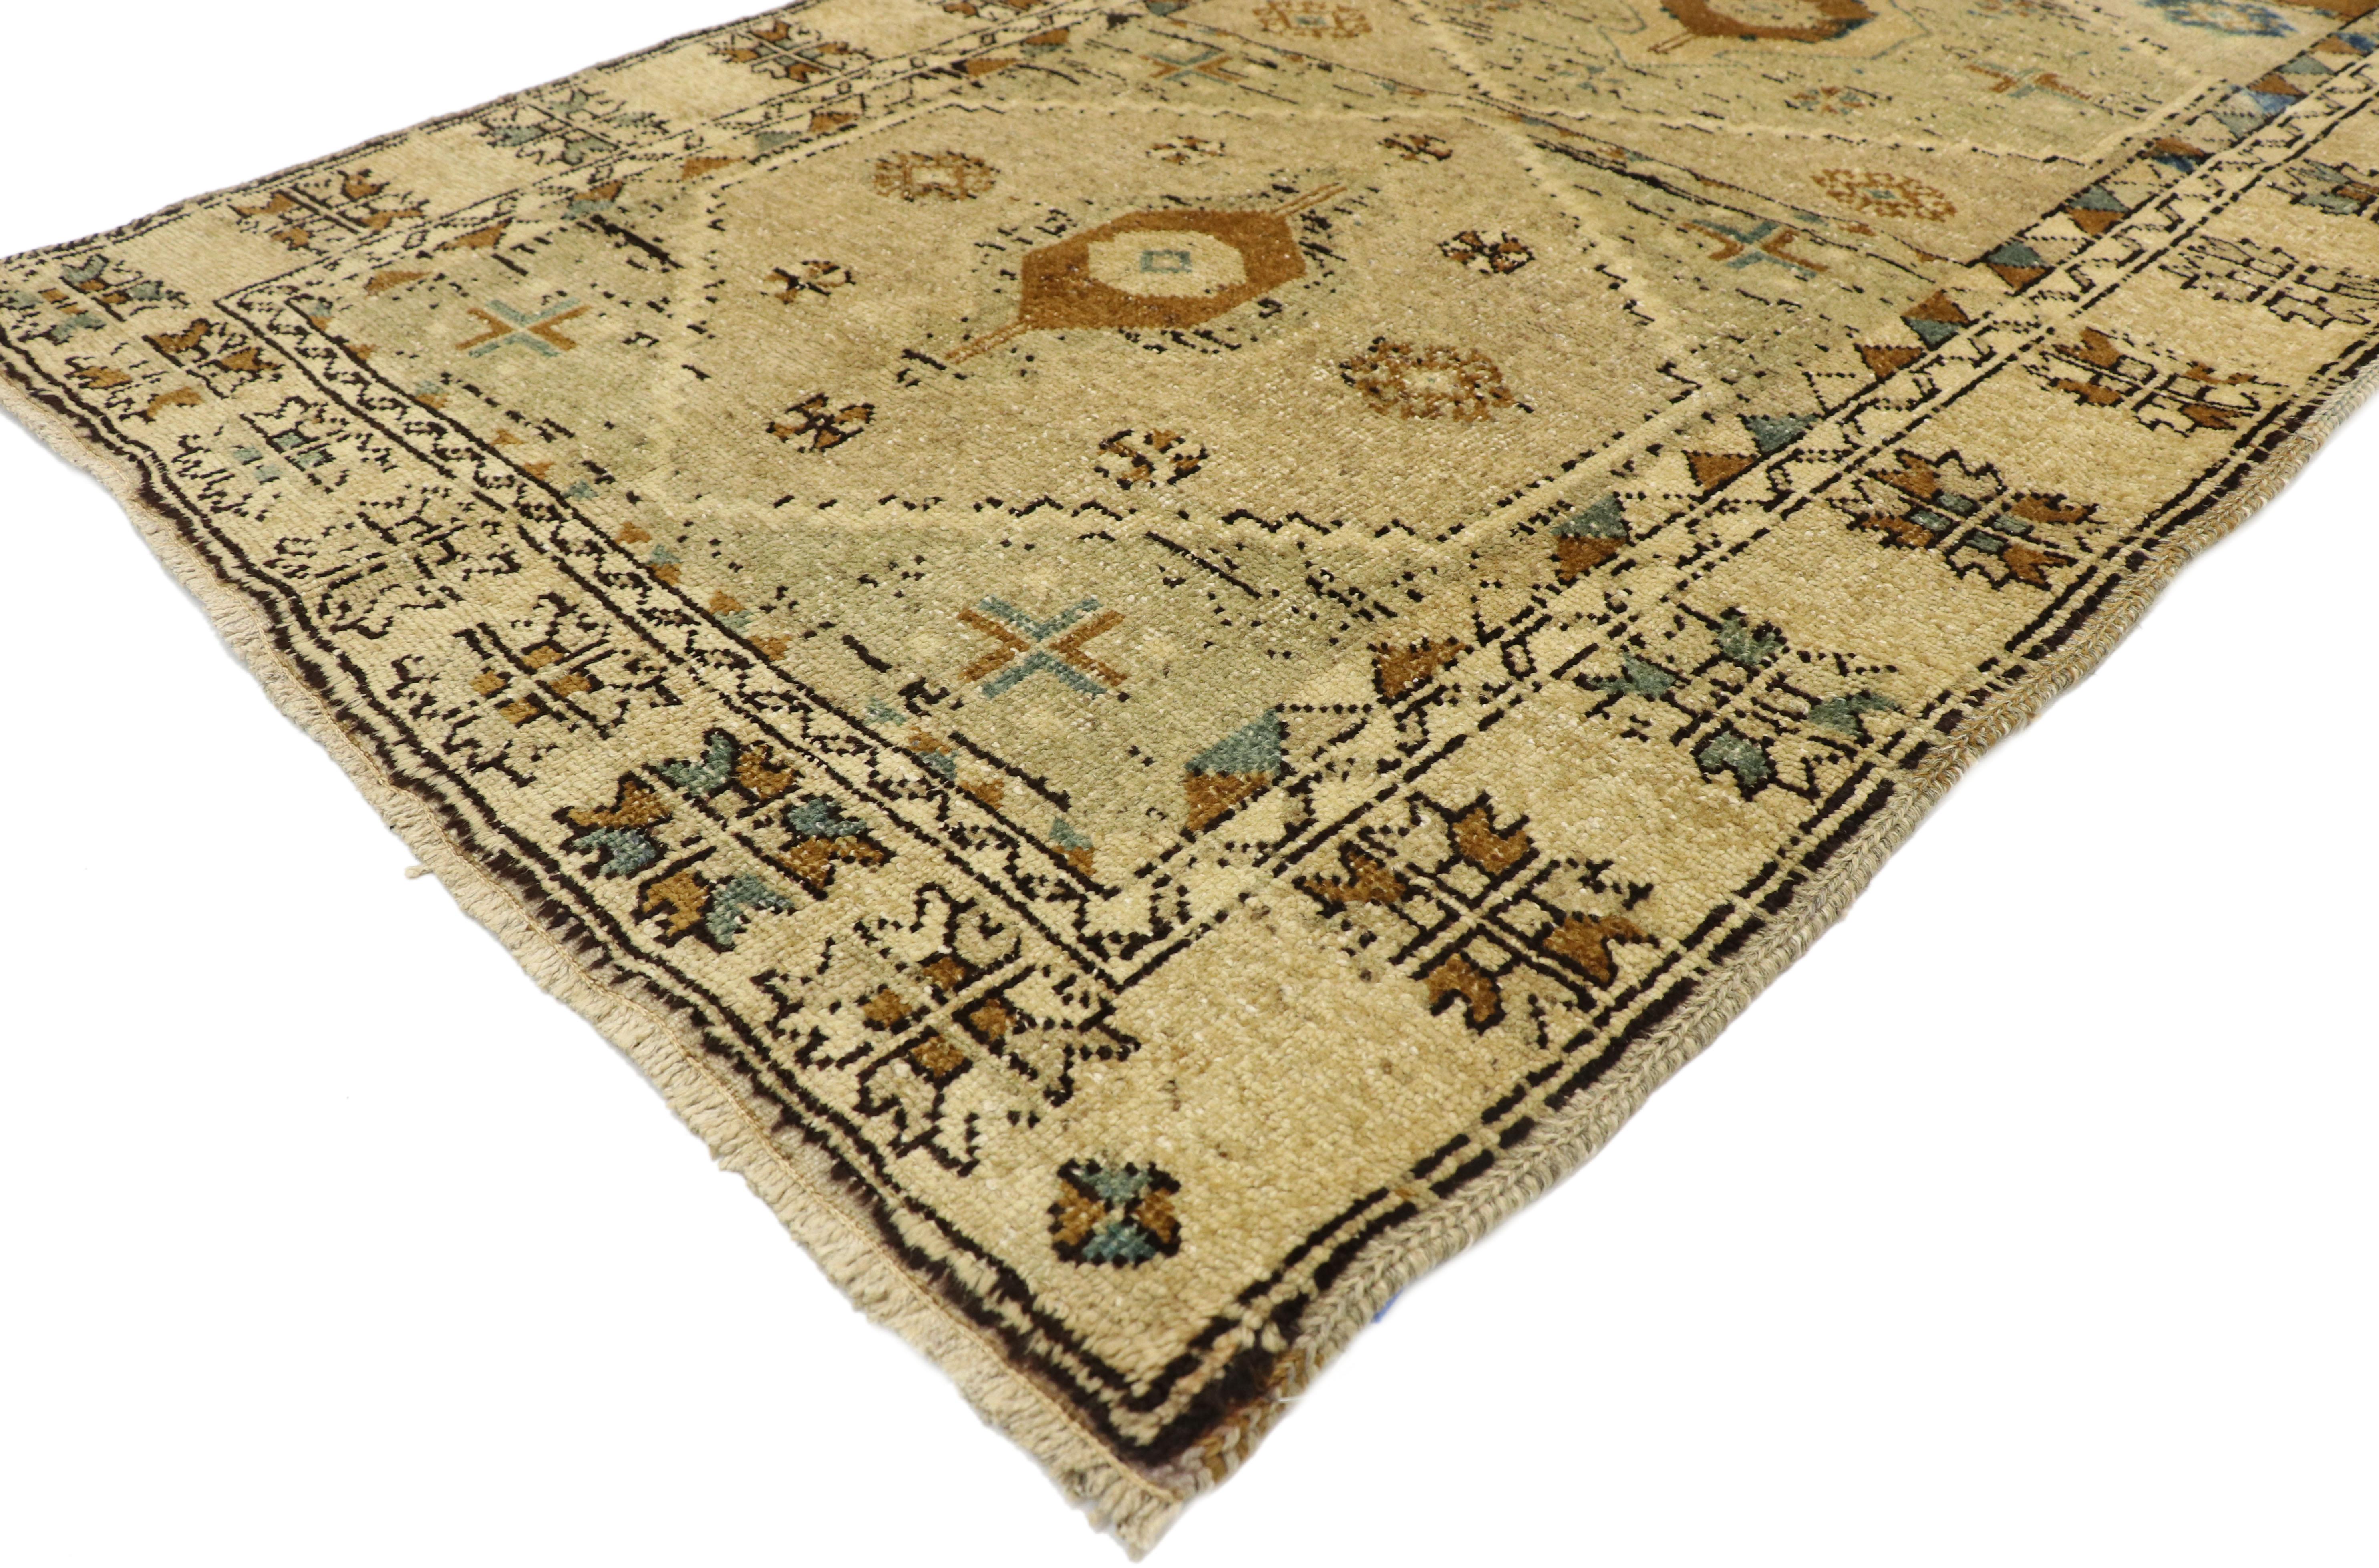 52852 vintage Turkish Oushak runner with Mid-Century Modern style. Warm and inviting, this hand knotted wool vintage Turkish Oushak runner beautifully embodies Mid-Century Modern style. It features five stepped hexagonal medallions in a compartment